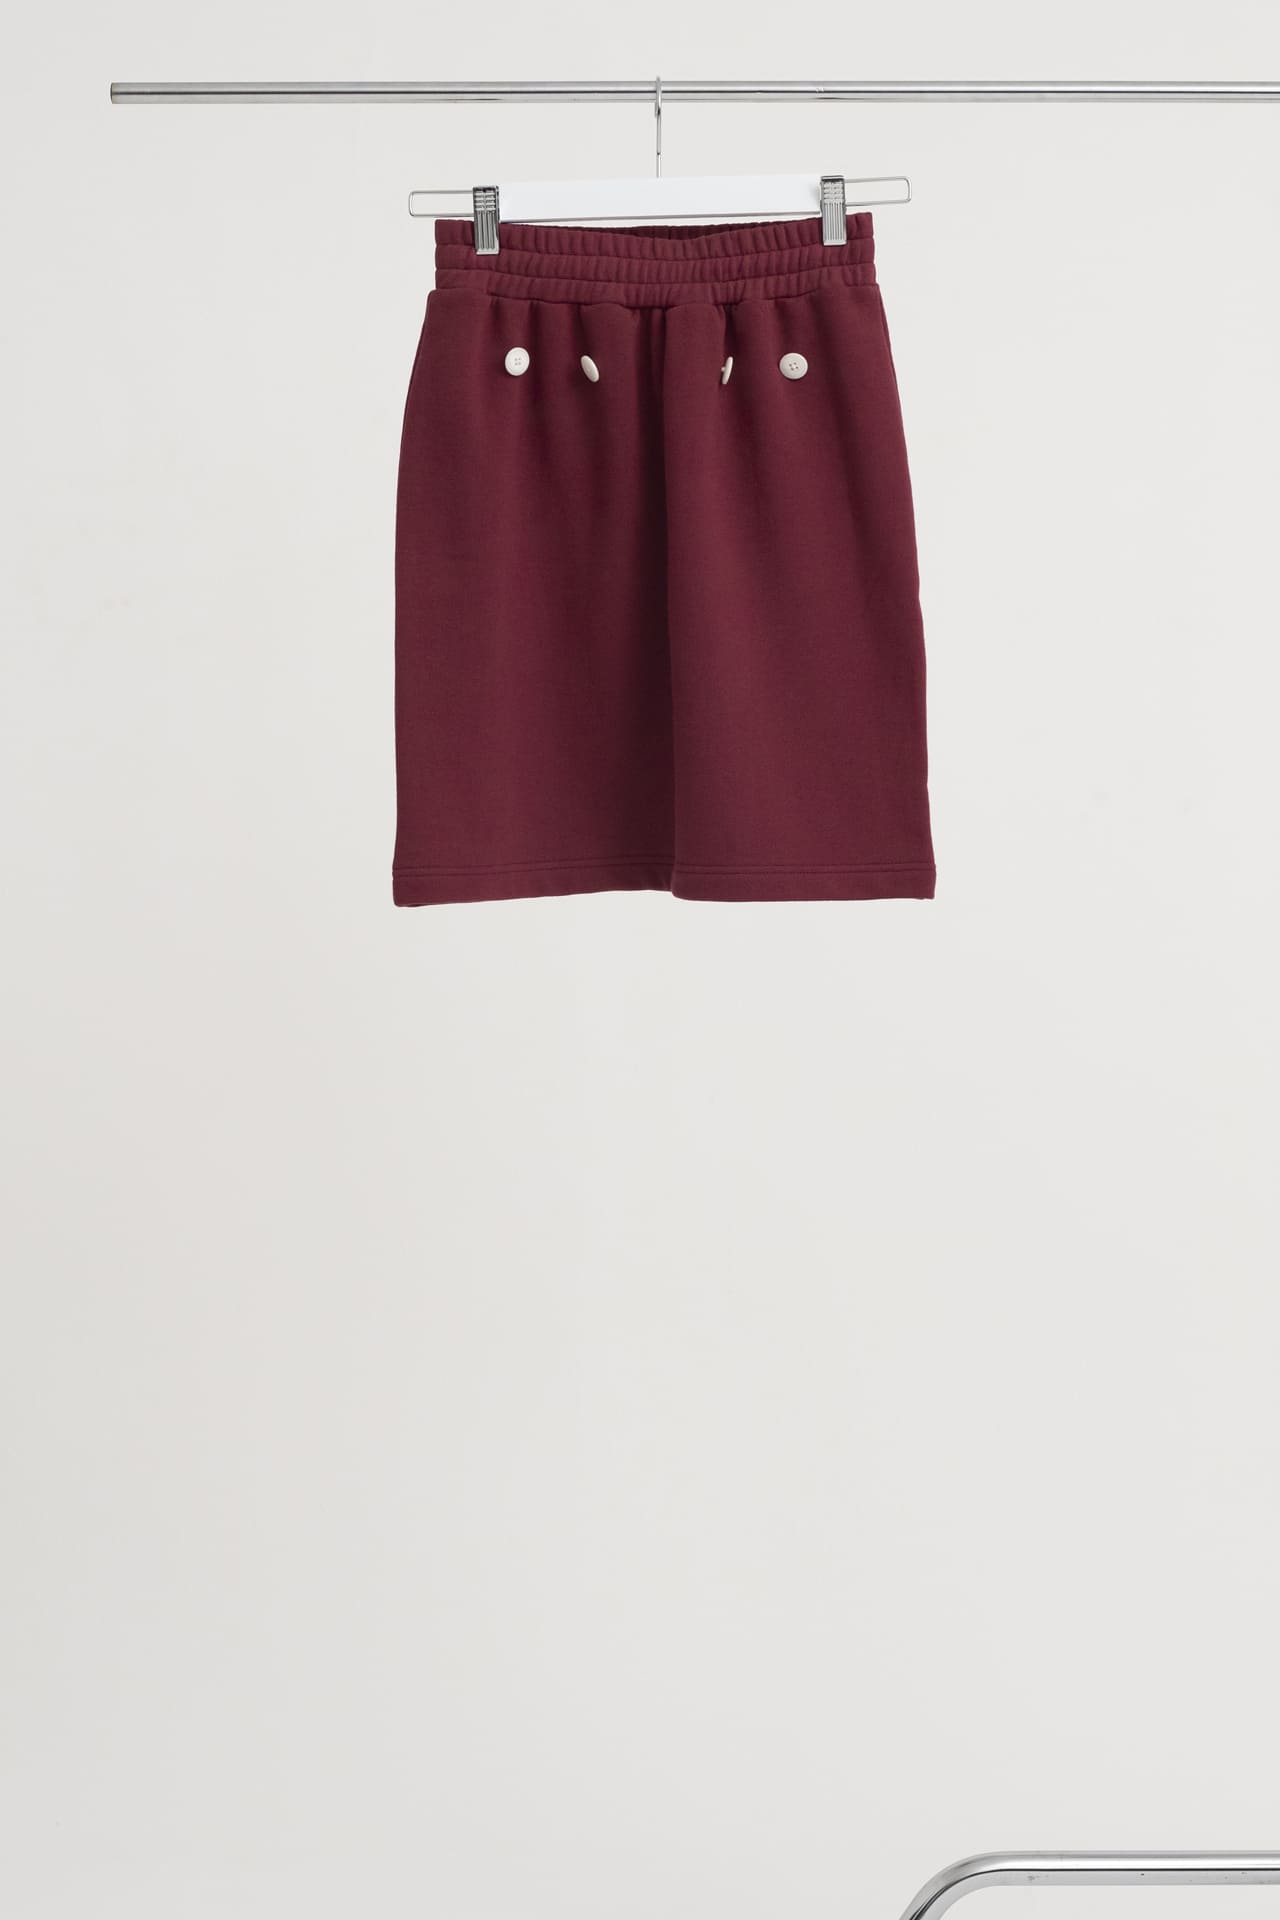 Layer_Sweat Skirt Wide Red